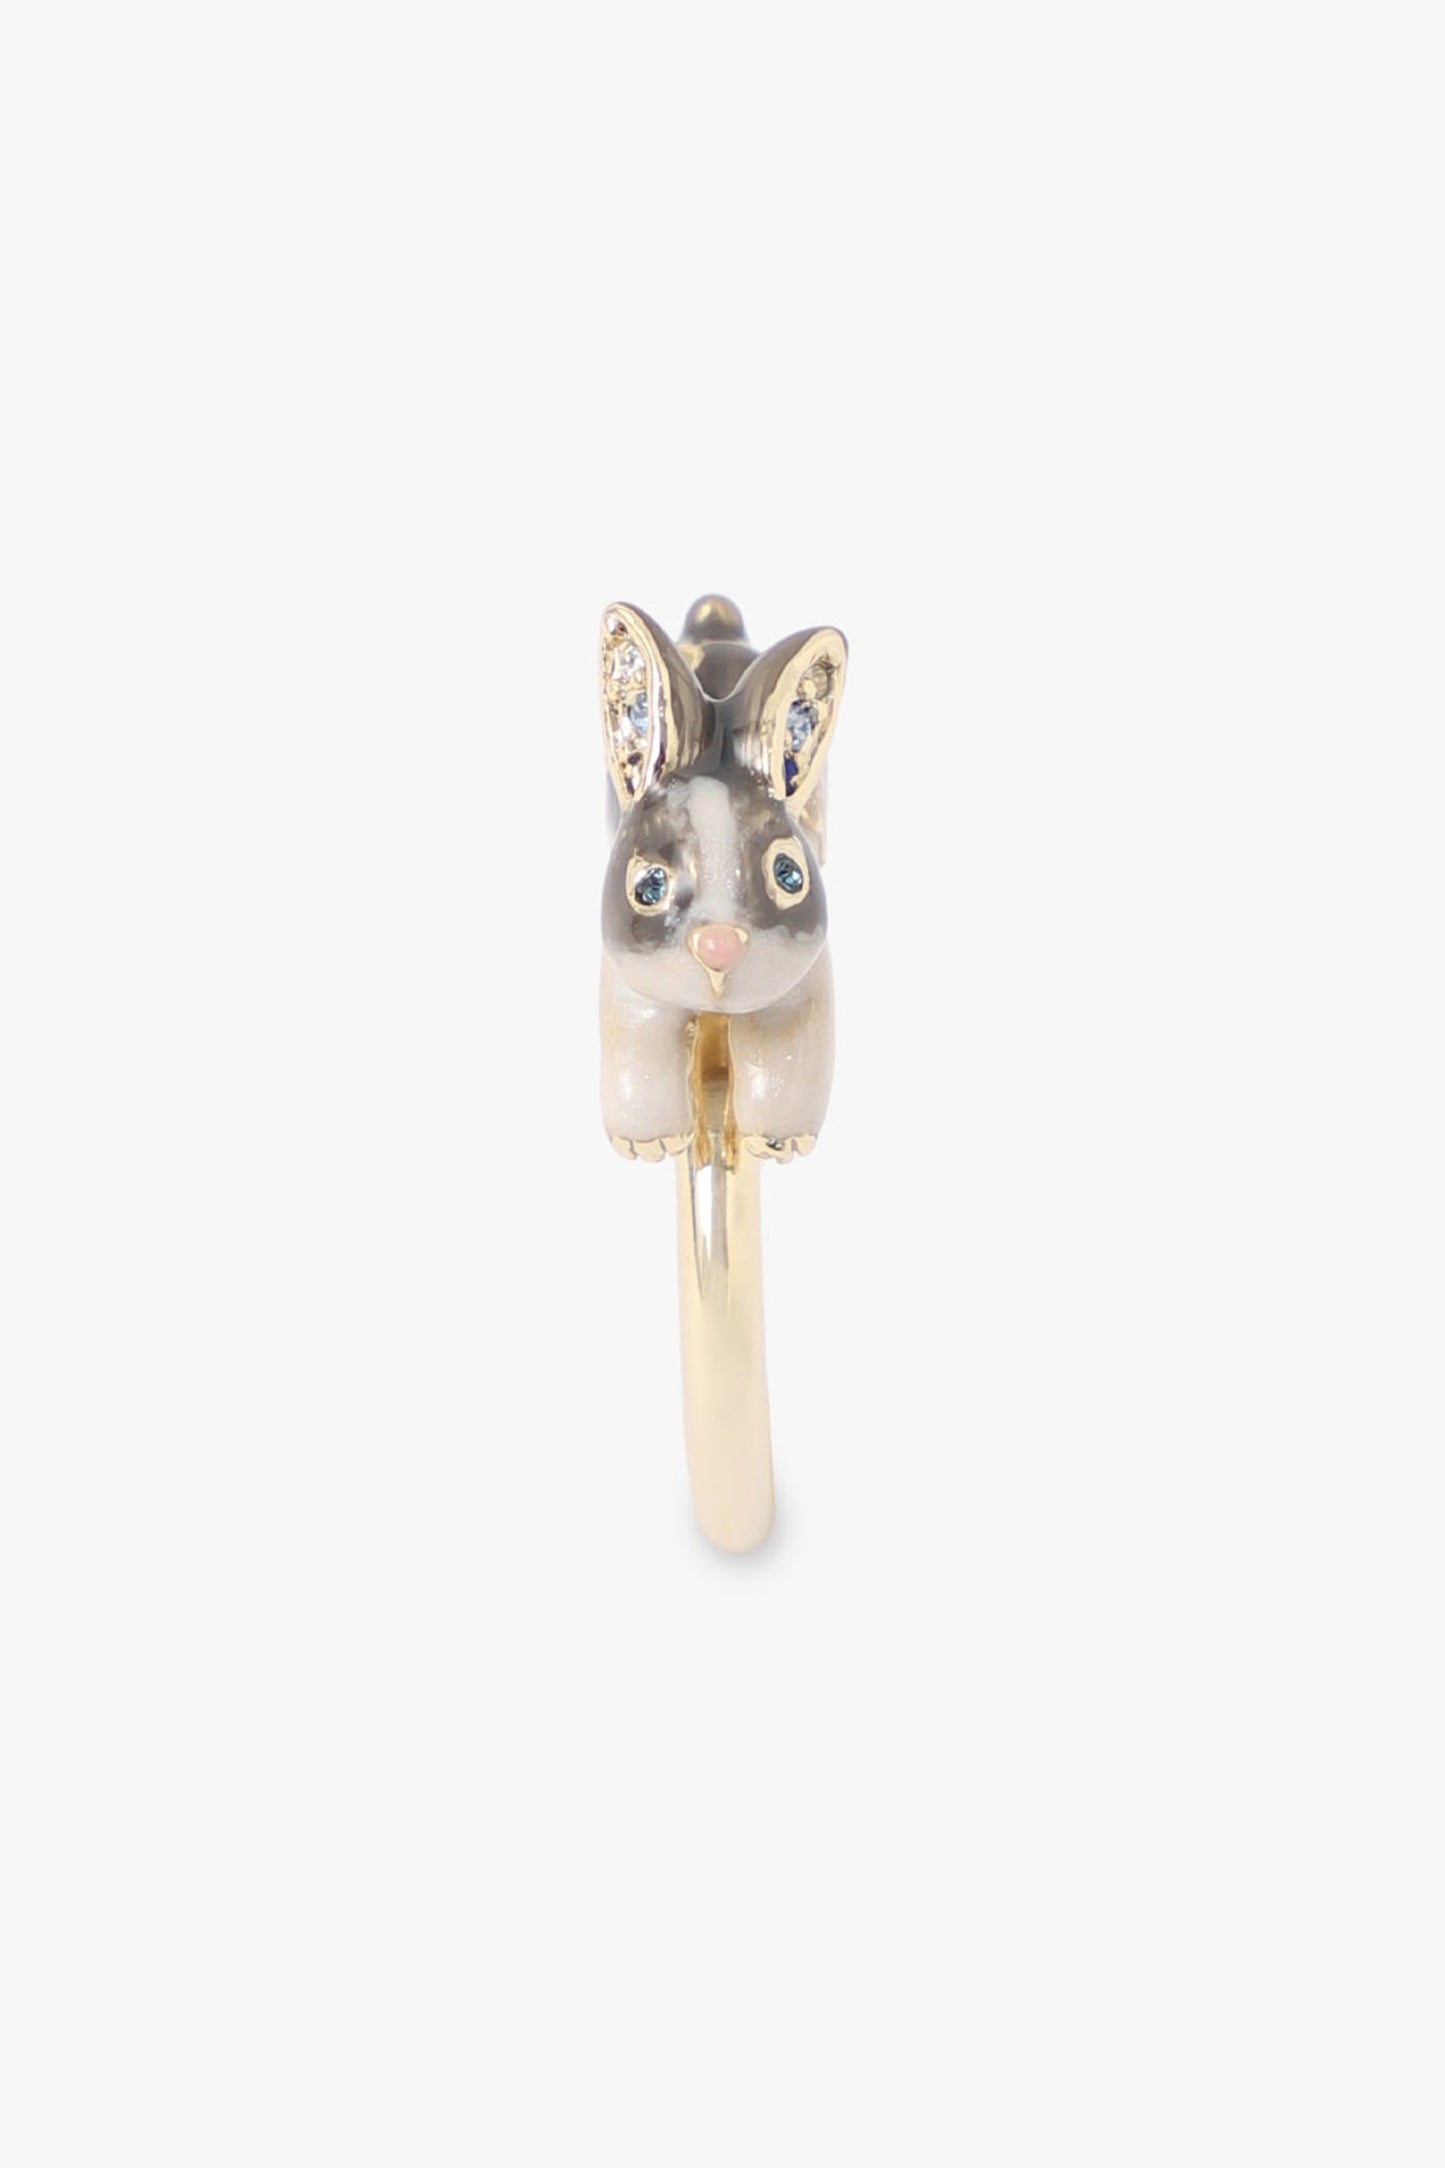 Grey Rabbit with blue eyes, golden on ears, paw, a pink nose, Running on a golden metal ring 